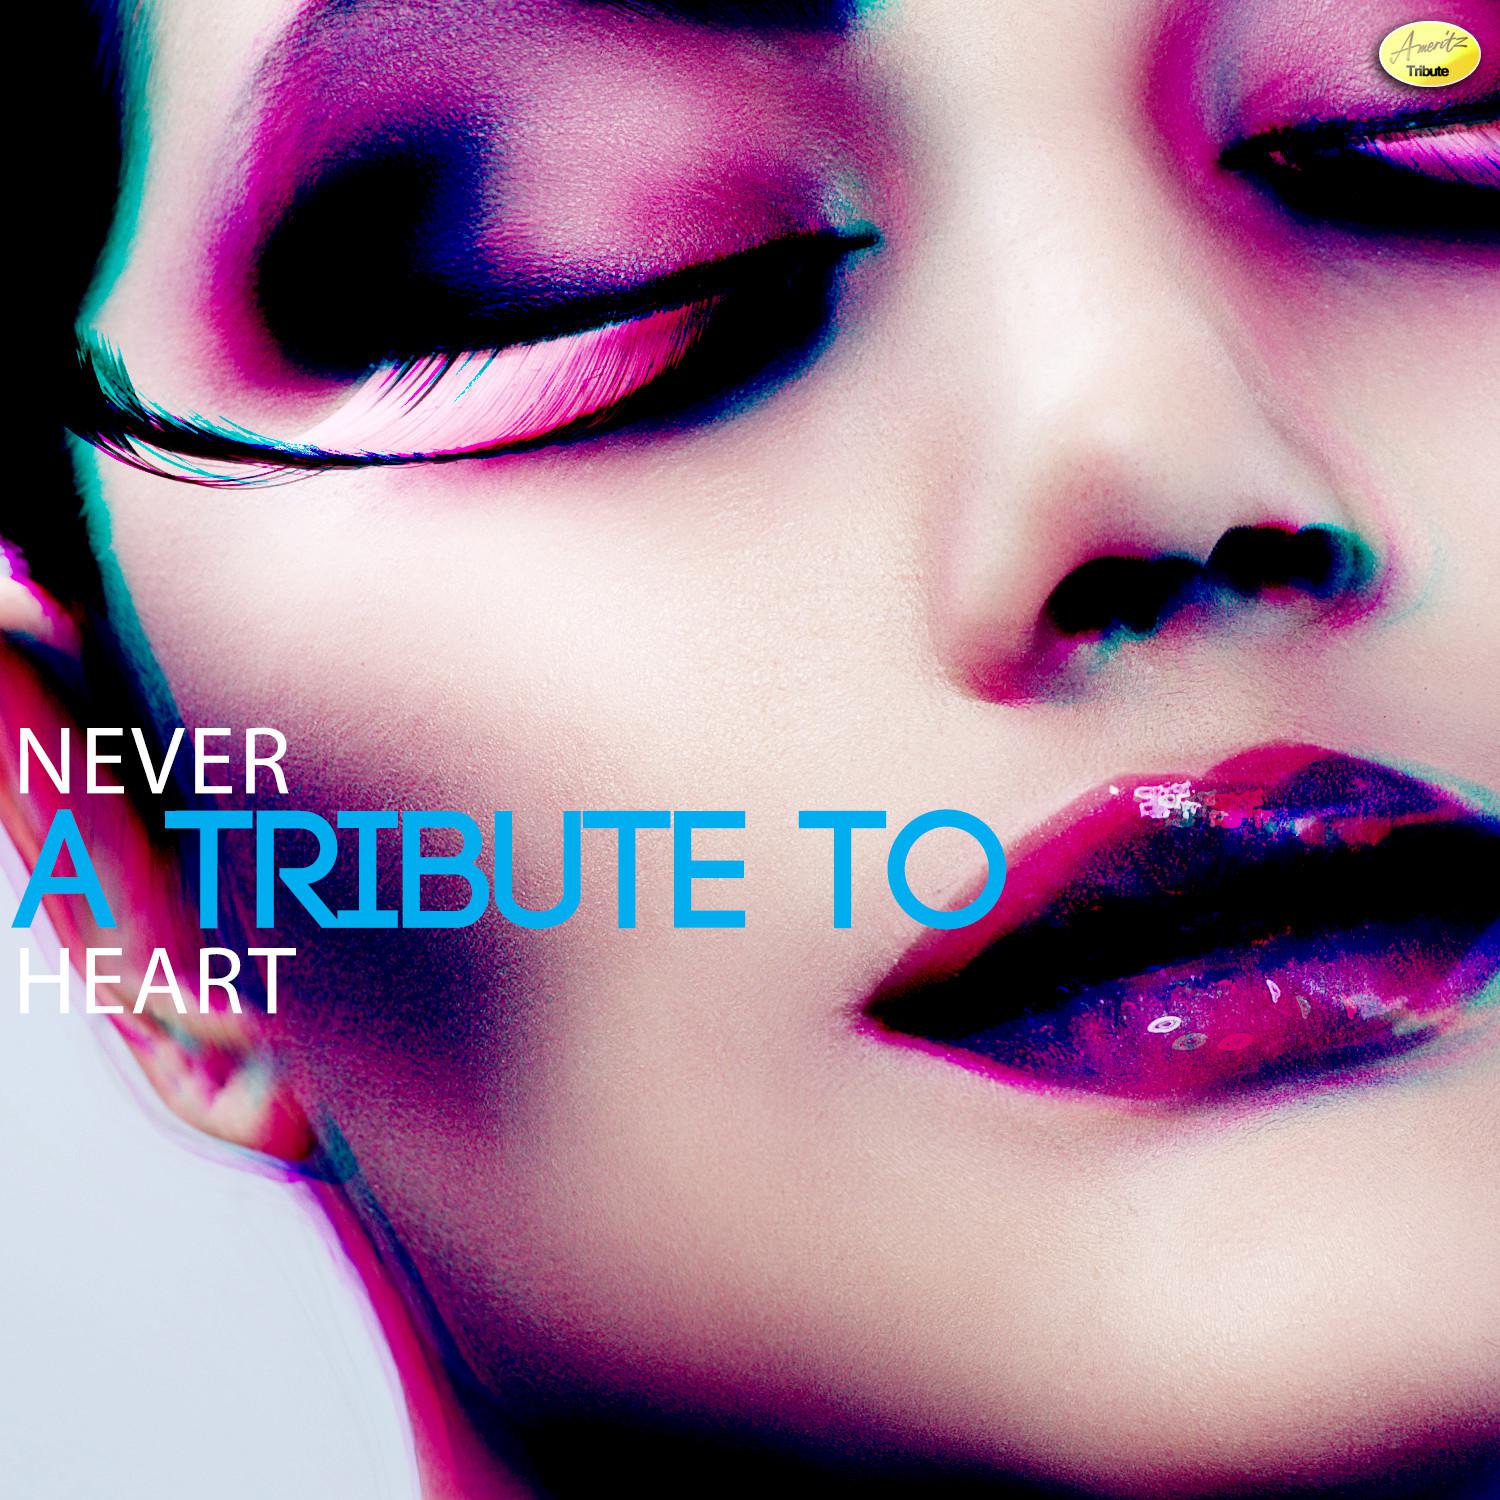 Never - A Tribute to Heart